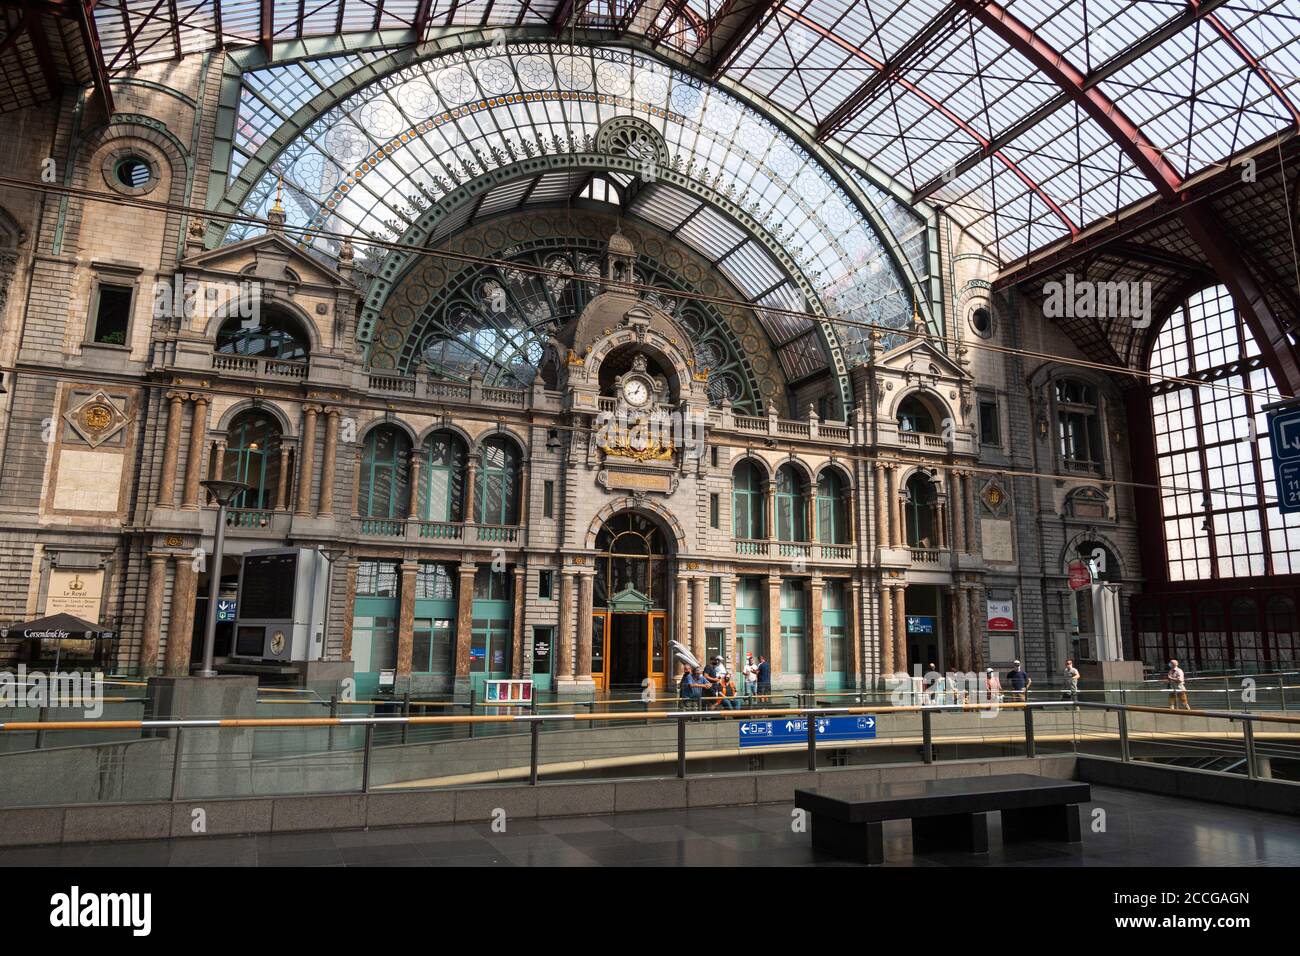 Antwerp, Belgium, August 16, 2020, Platform of the central station with a view of the famous clock Stock Photo